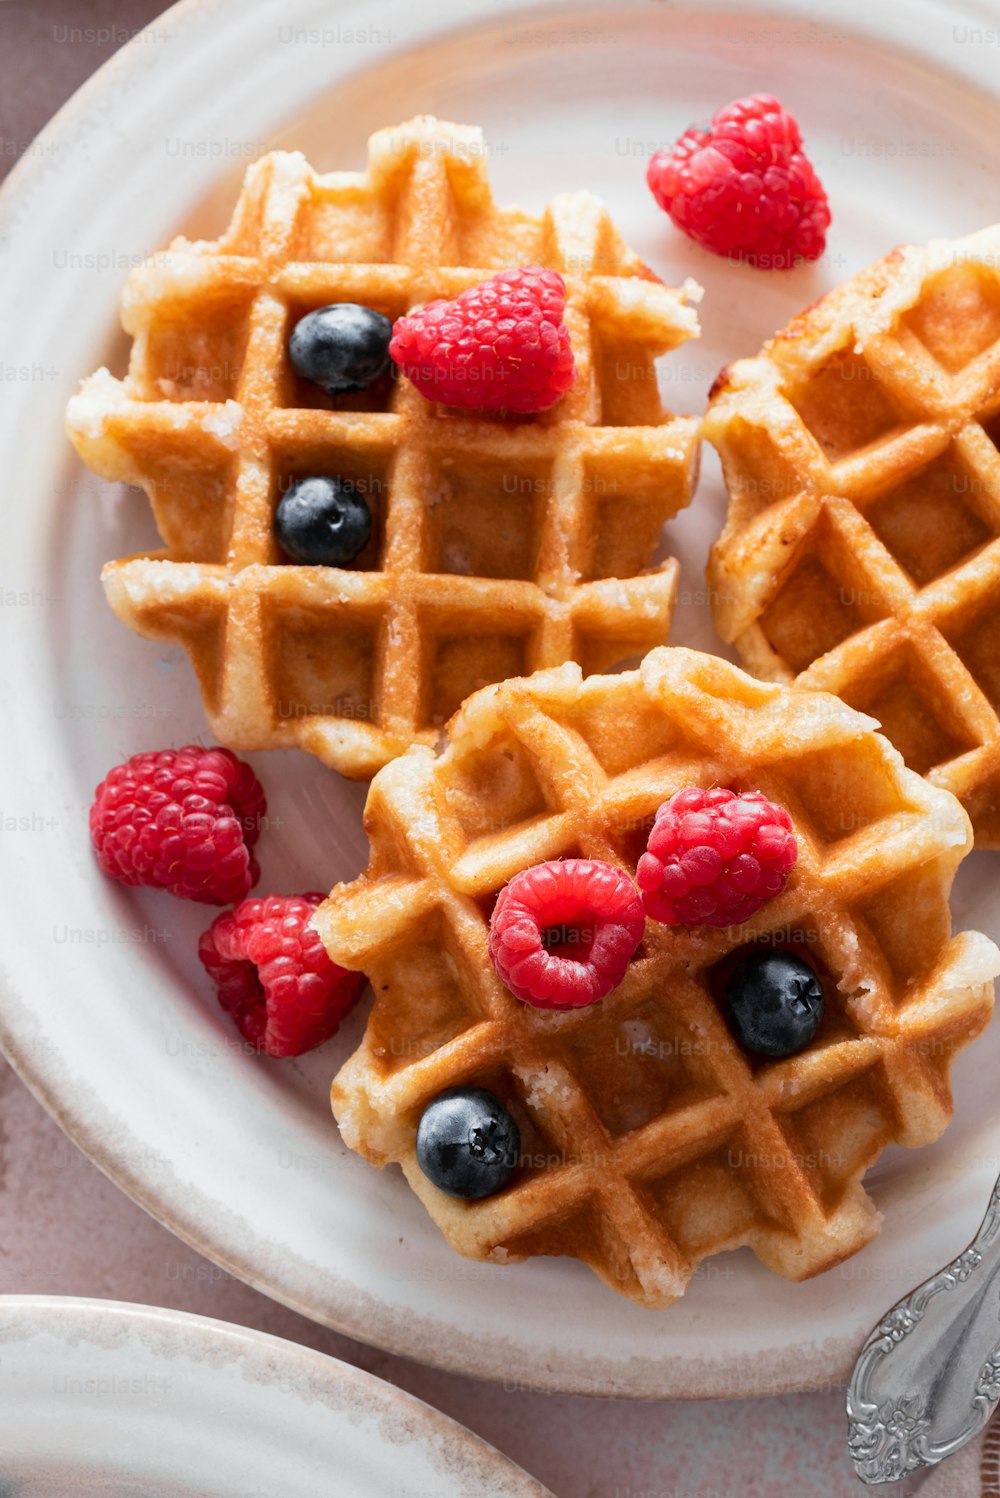 a plate of waffles with raspberries and blueberries